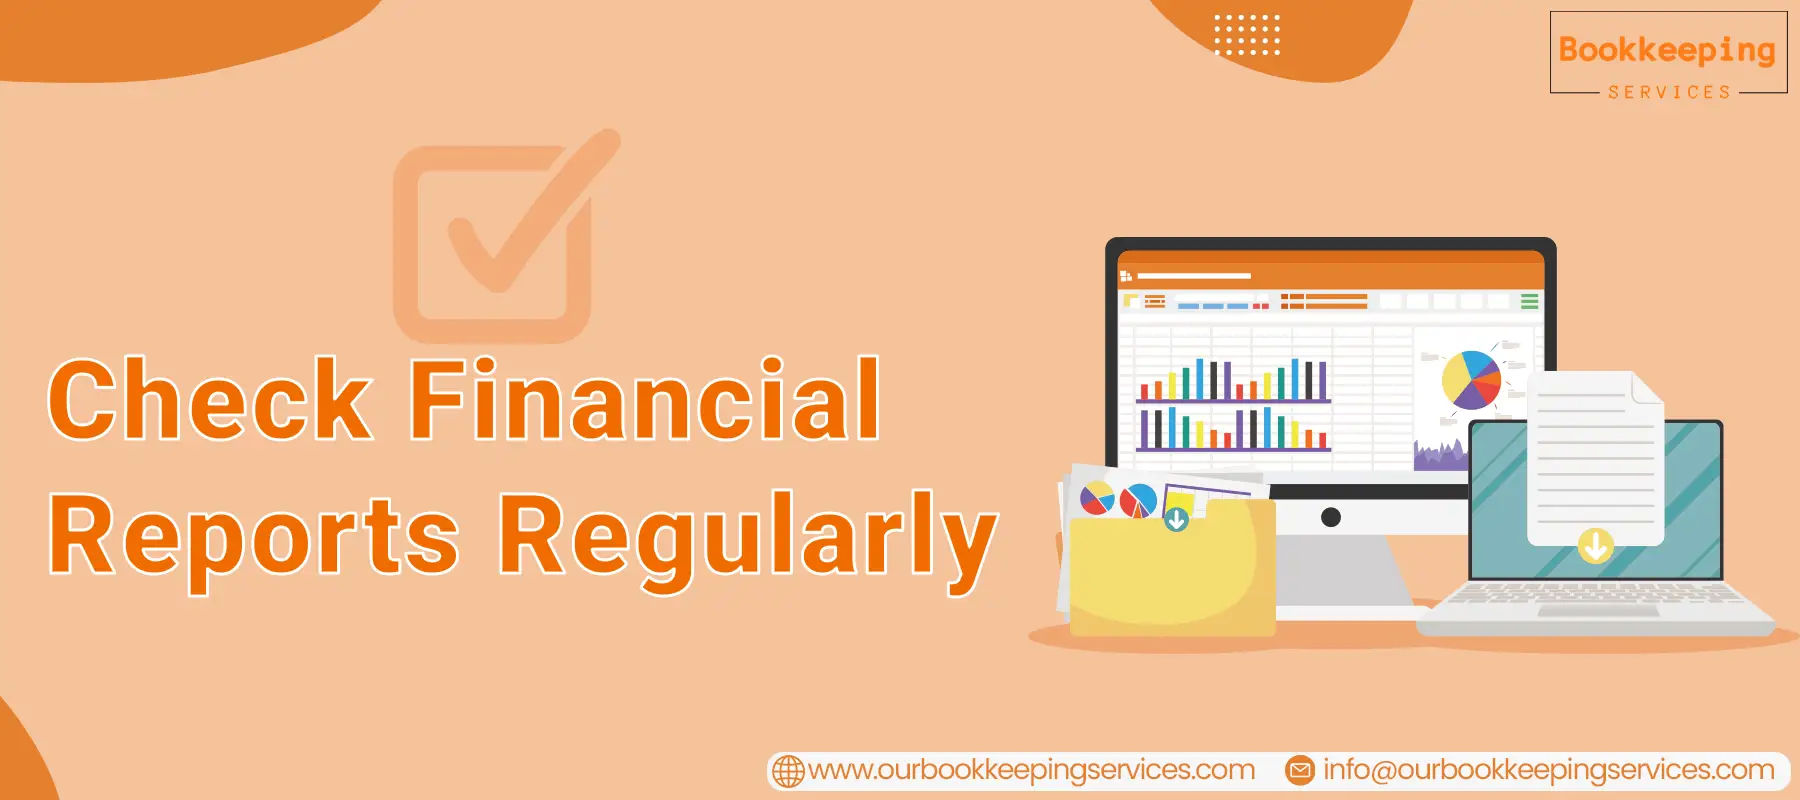 Create and check financial reports regularly